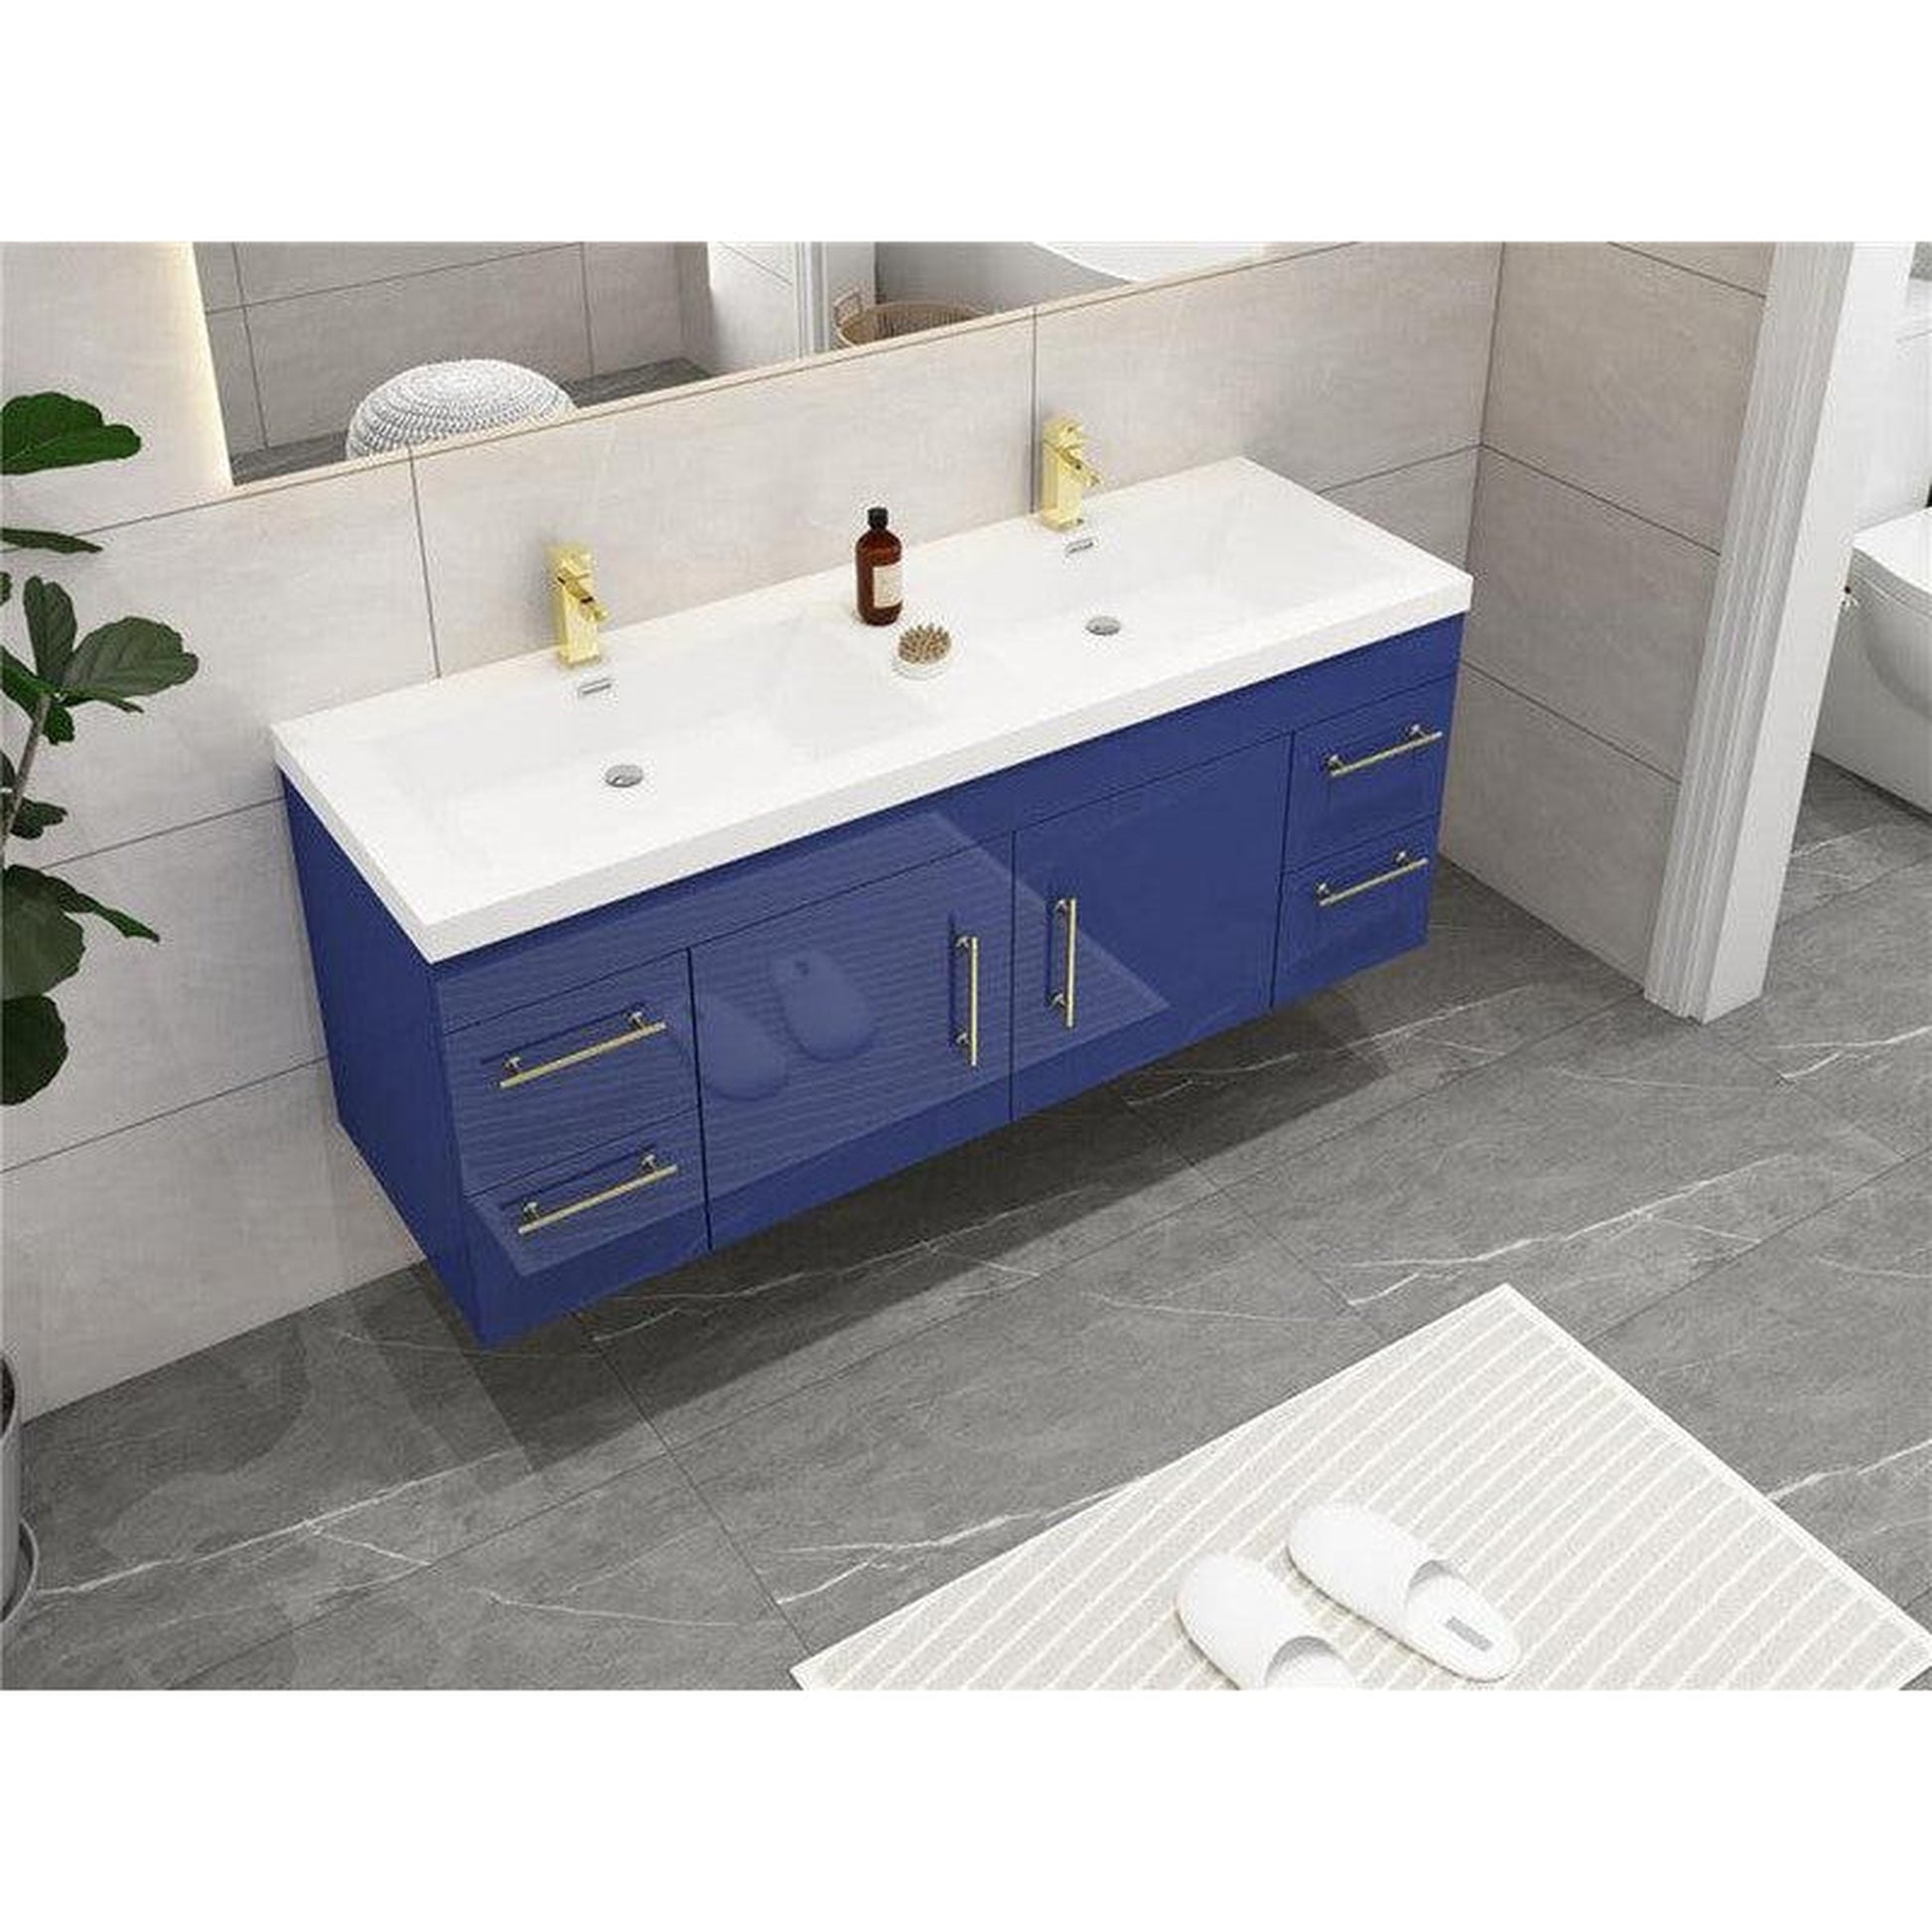 Moreno Bath ELSA 60" High Gloss Night Blue Wall-Mounted Vanity With Double Reinforced White Acrylic Sinks